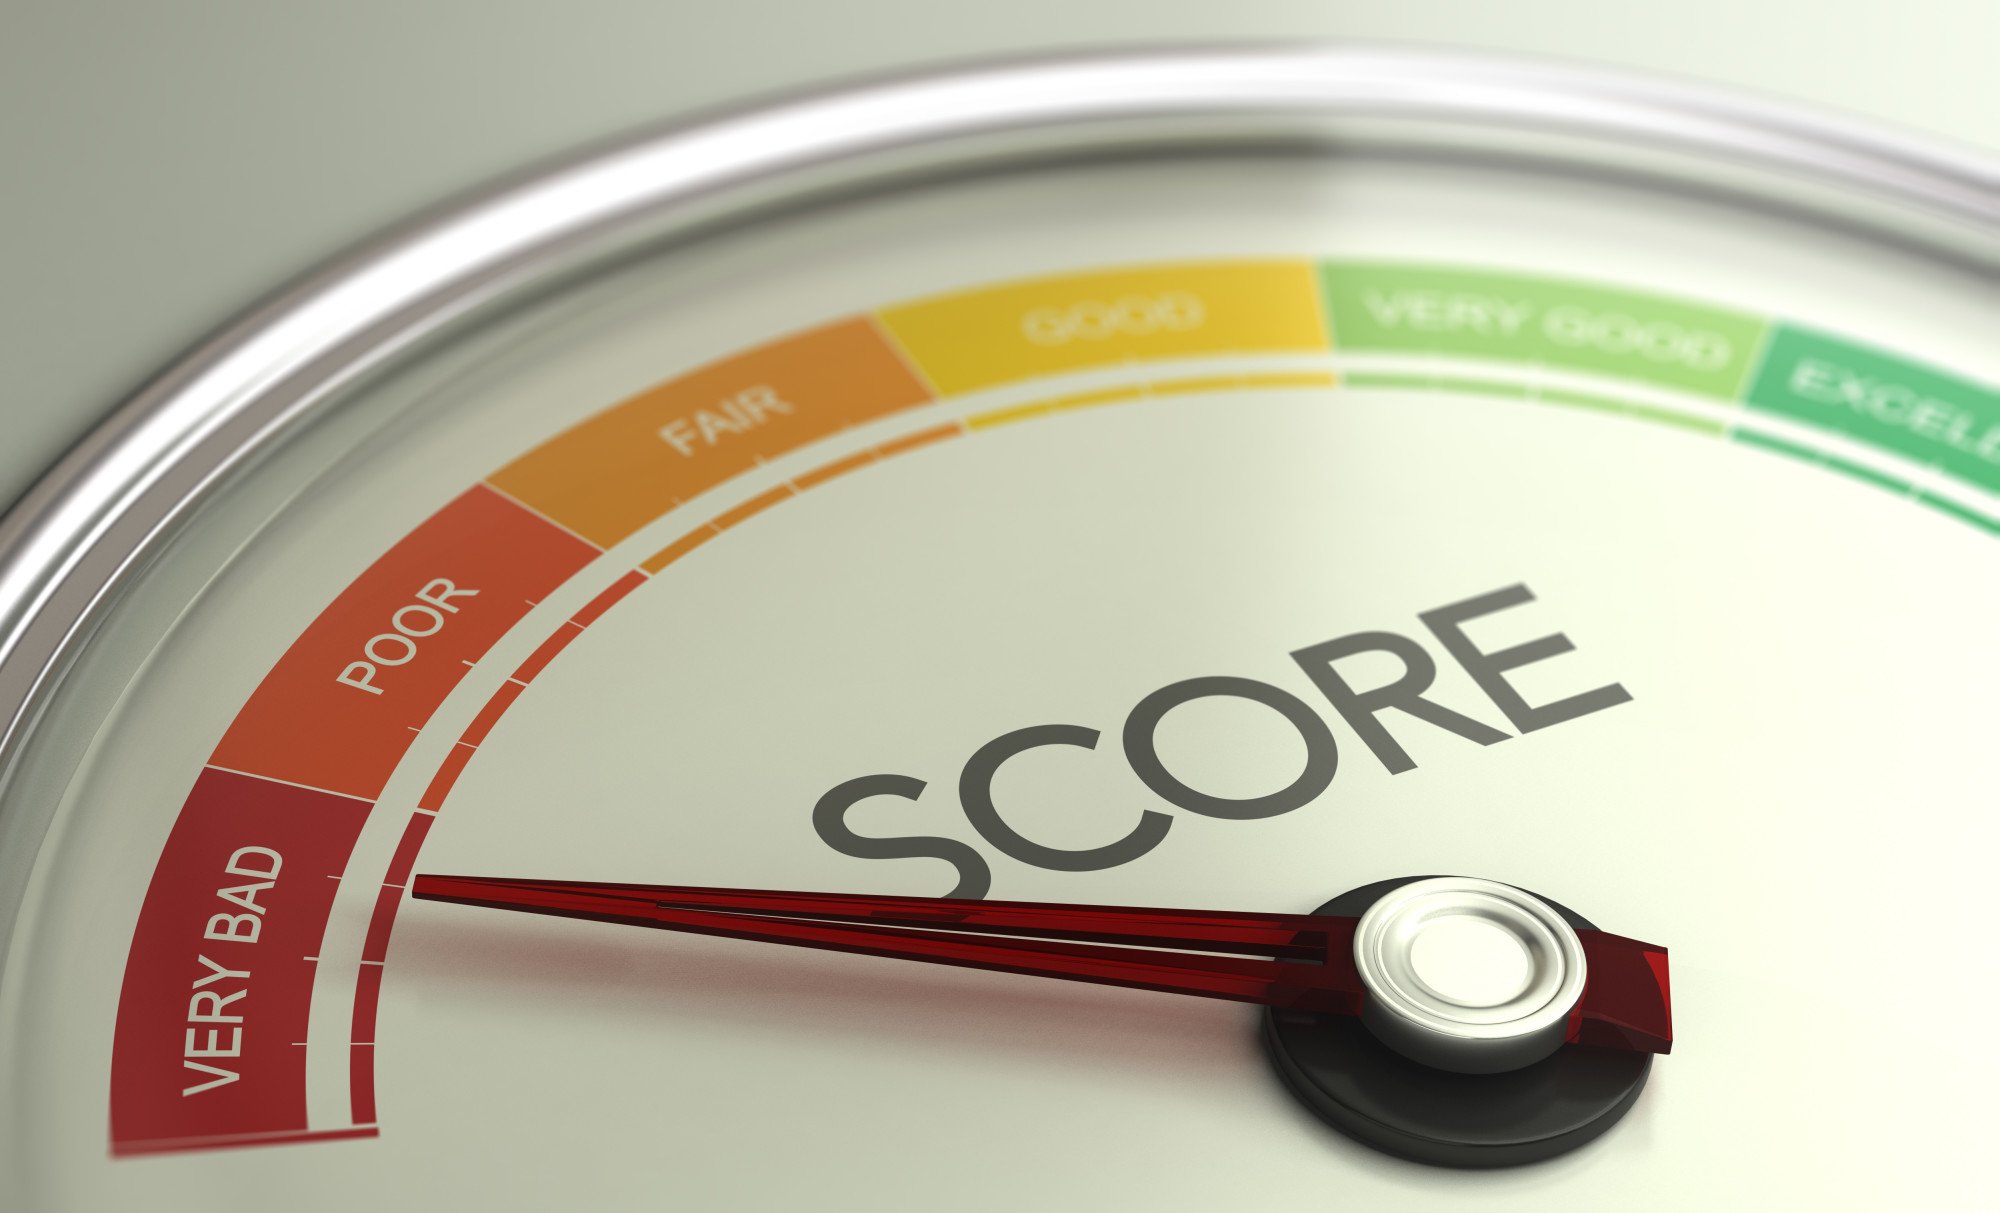 What Hurts Your Credit Score? 9 Things That Can Do Harm